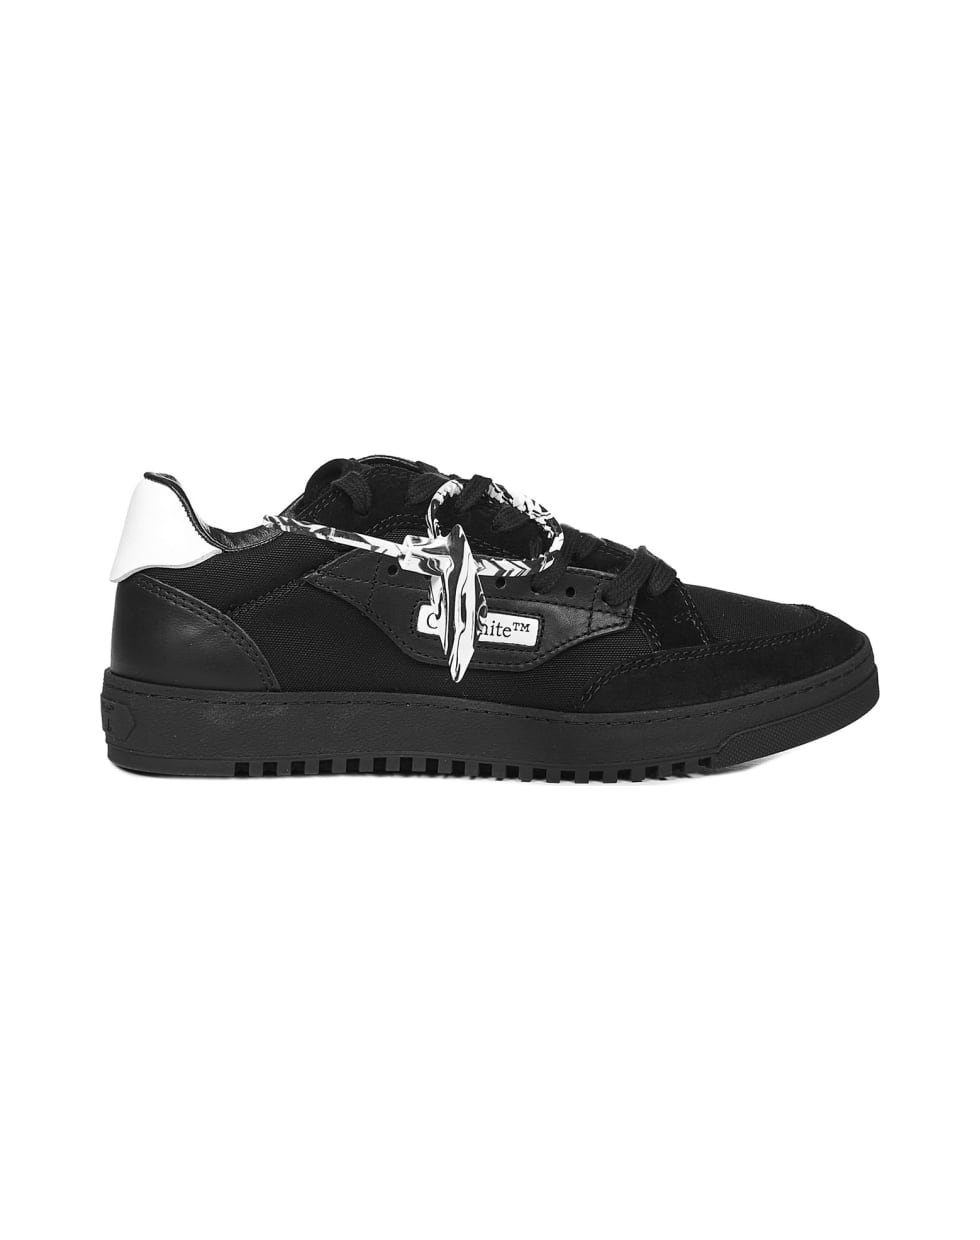 Off-White 5.0 Sneakers - Black